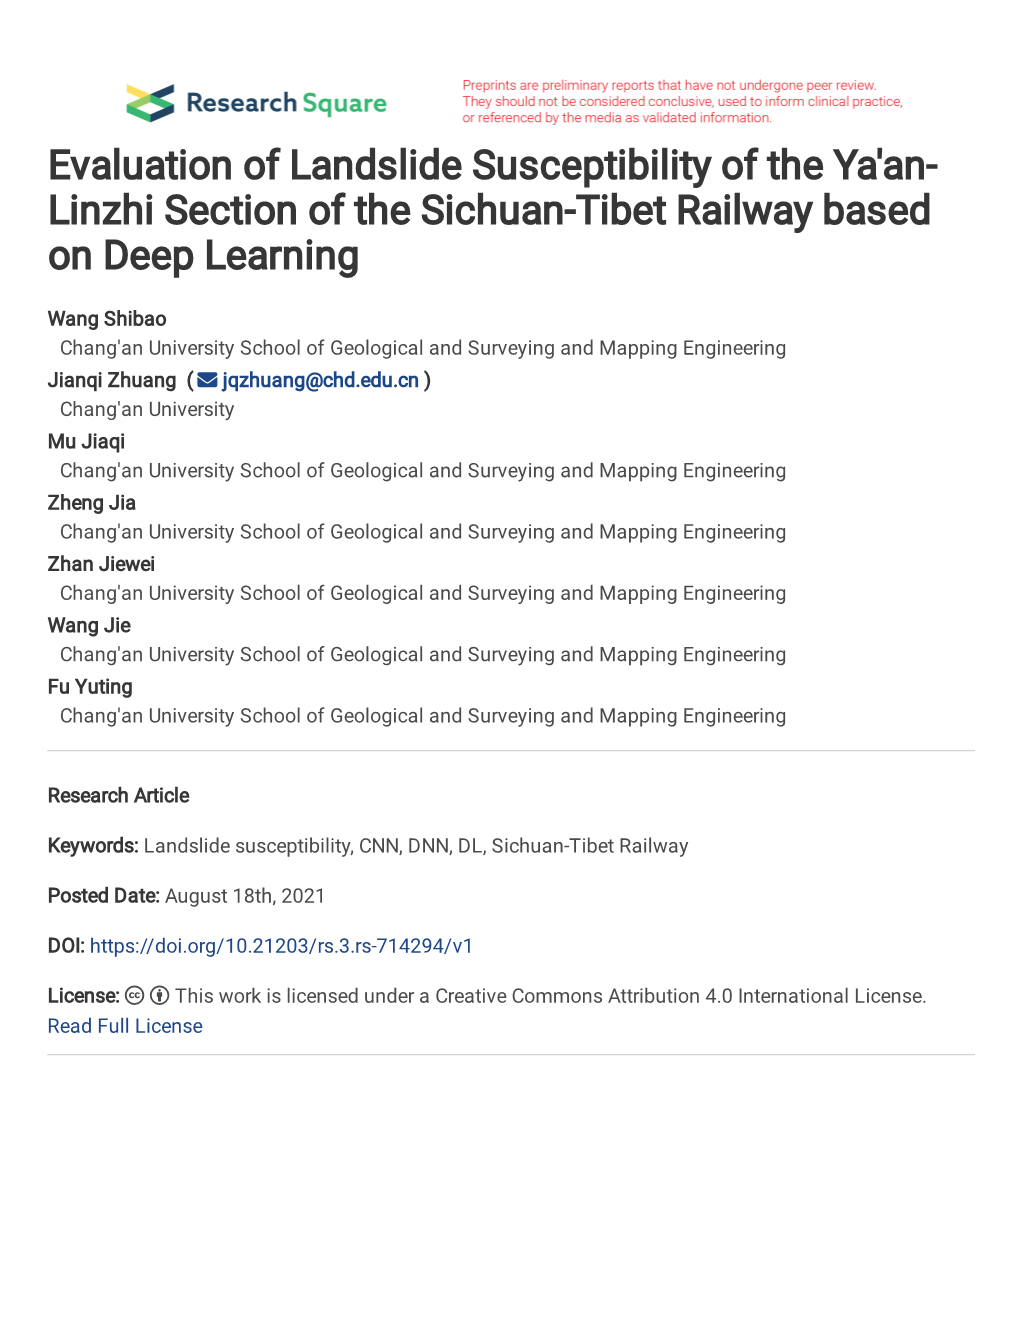 Evaluation of Landslide Susceptibility of the Ya'an- Linzhi Section of the Sichuan-Tibet Railway Based on Deep Learning